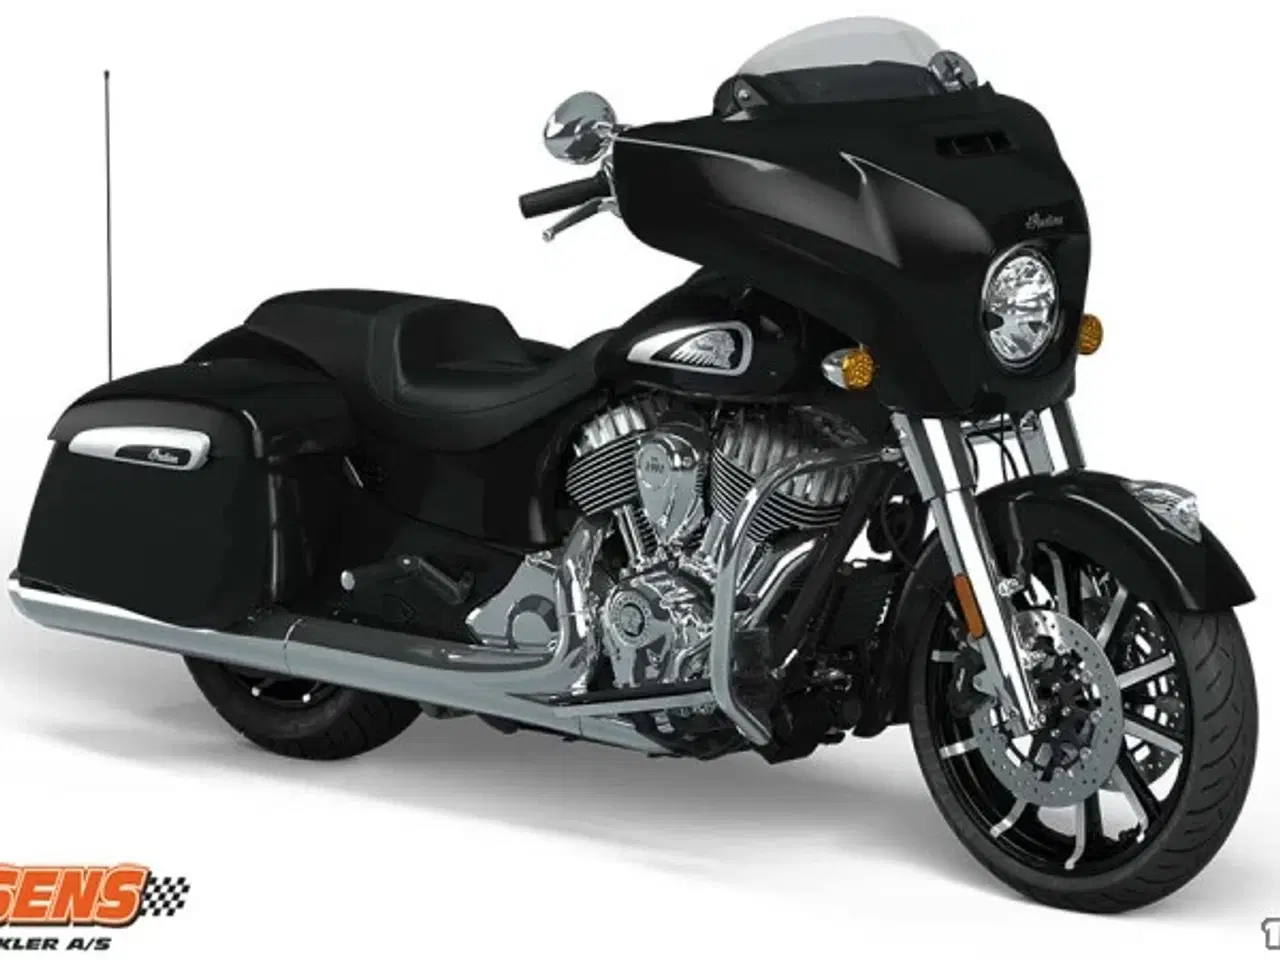 Billede 1 - Indian Chieftain Limited